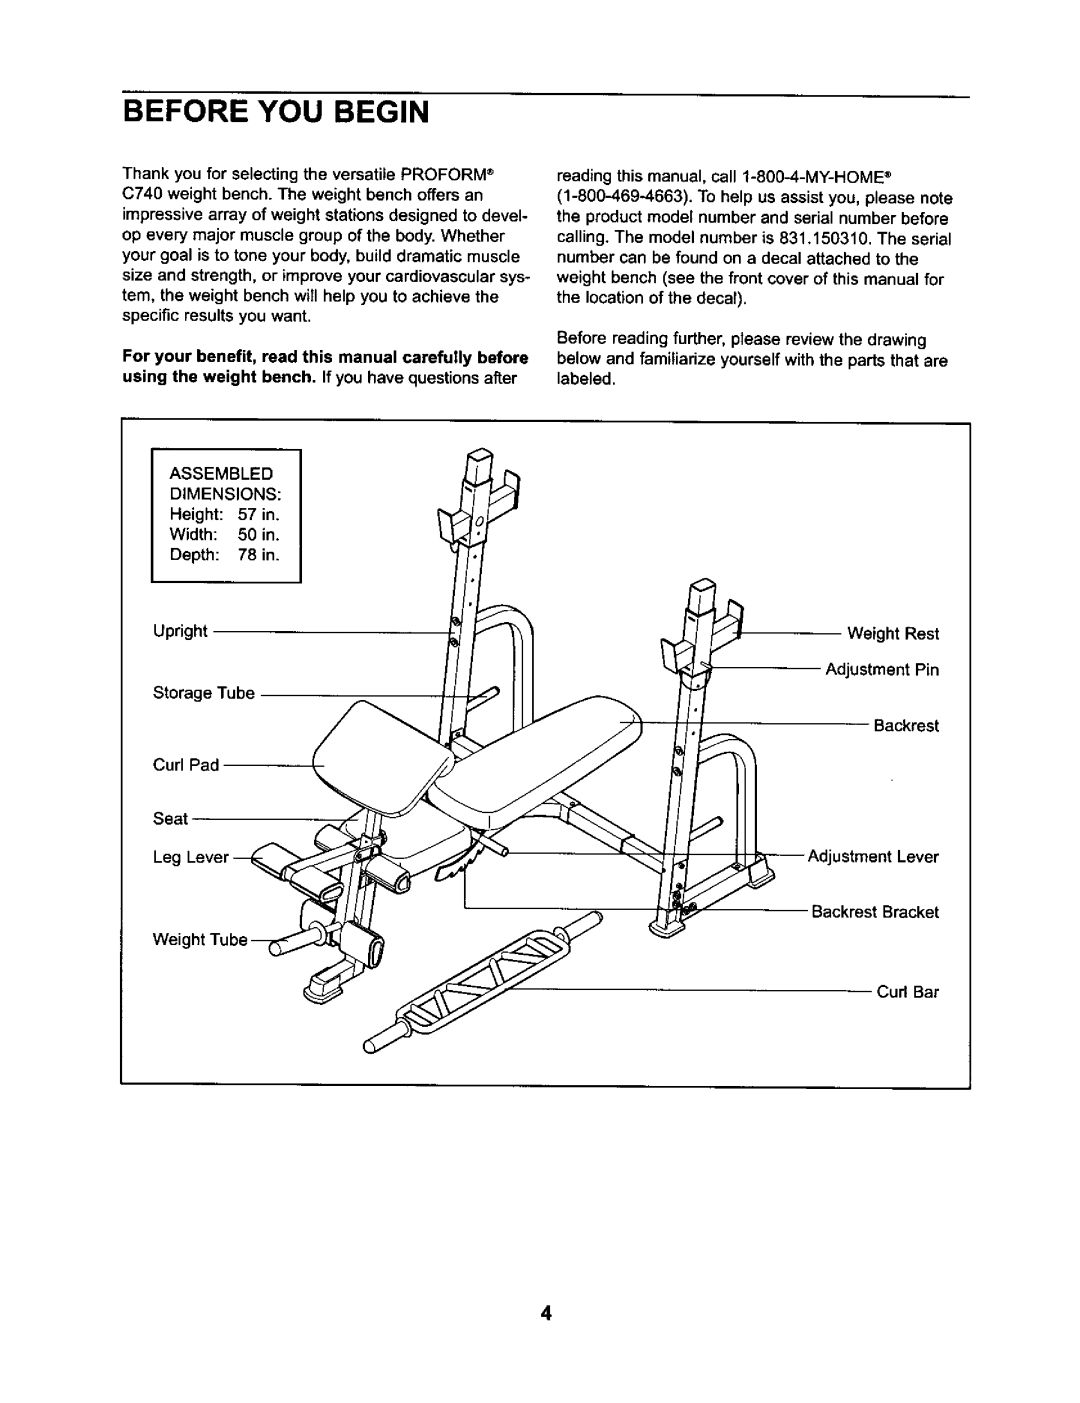 ProForm 831.15032 user manual Before You Begin, Upright, reading this manual, call 1-800--4-MY-HOME, ustment Lever 